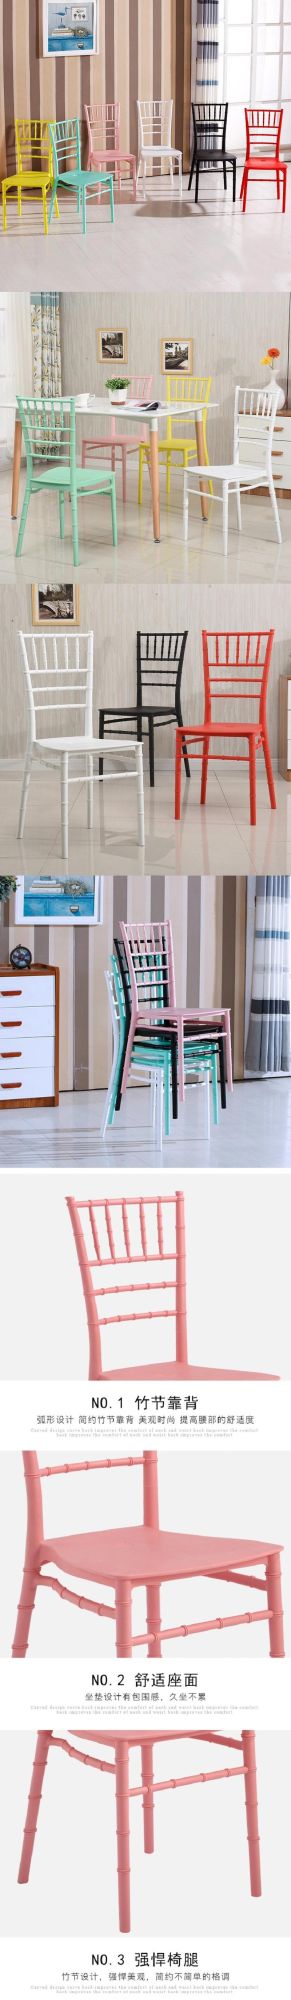 Styling Design Transparent Chiavari Chair Garden Furniture Wedding Chair No Covers Saloon Stacking PP Wedding Chair Cheap Bamboo Style Chair for Event